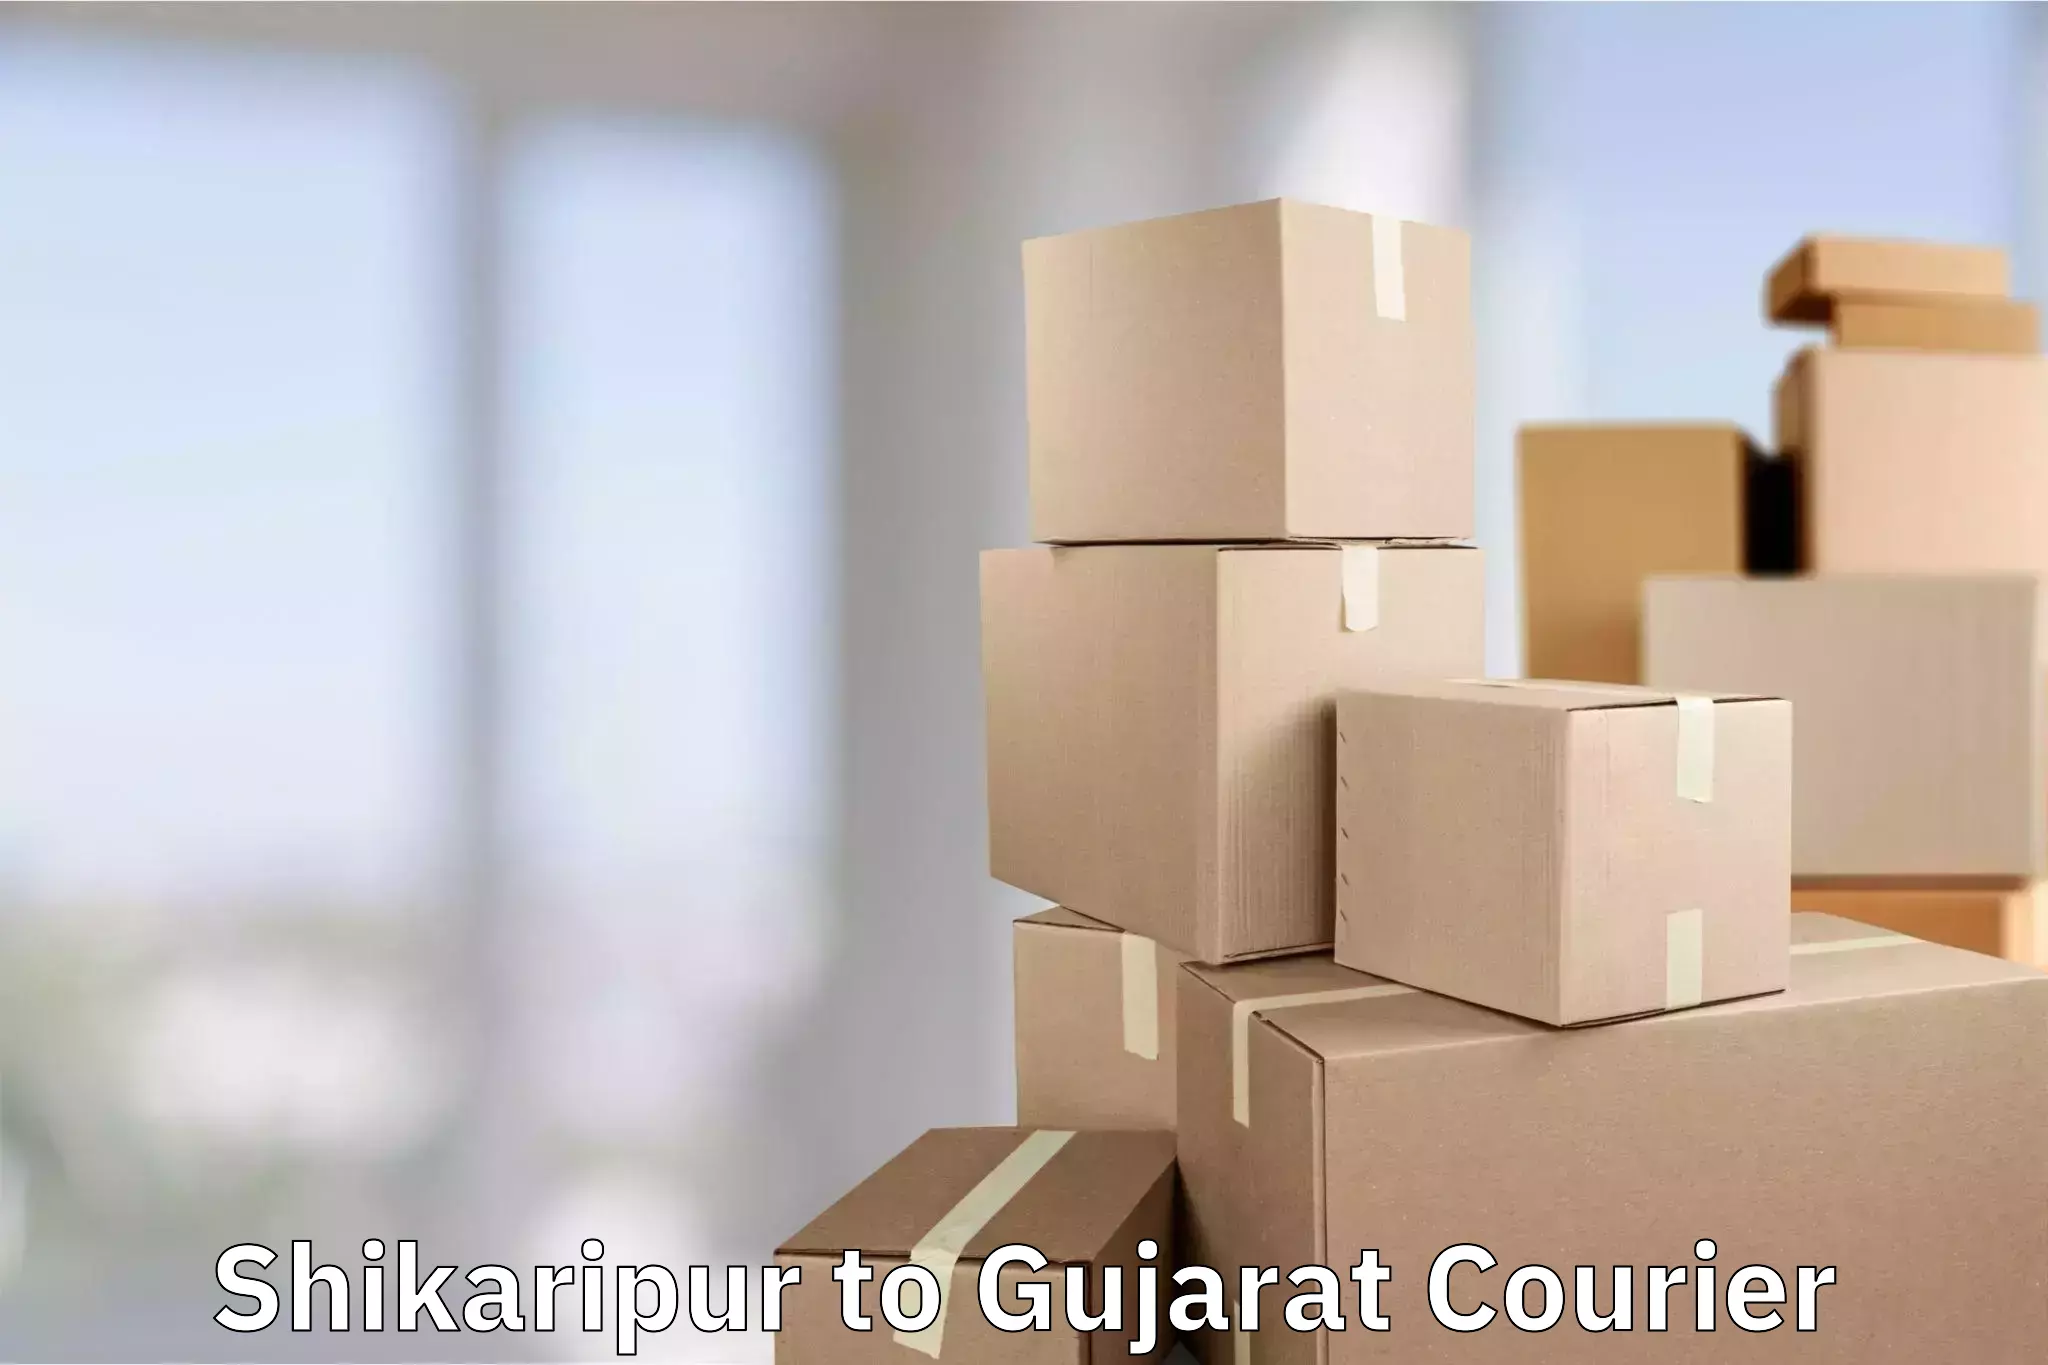 Luggage transport consultancy Shikaripur to Ahmedabad